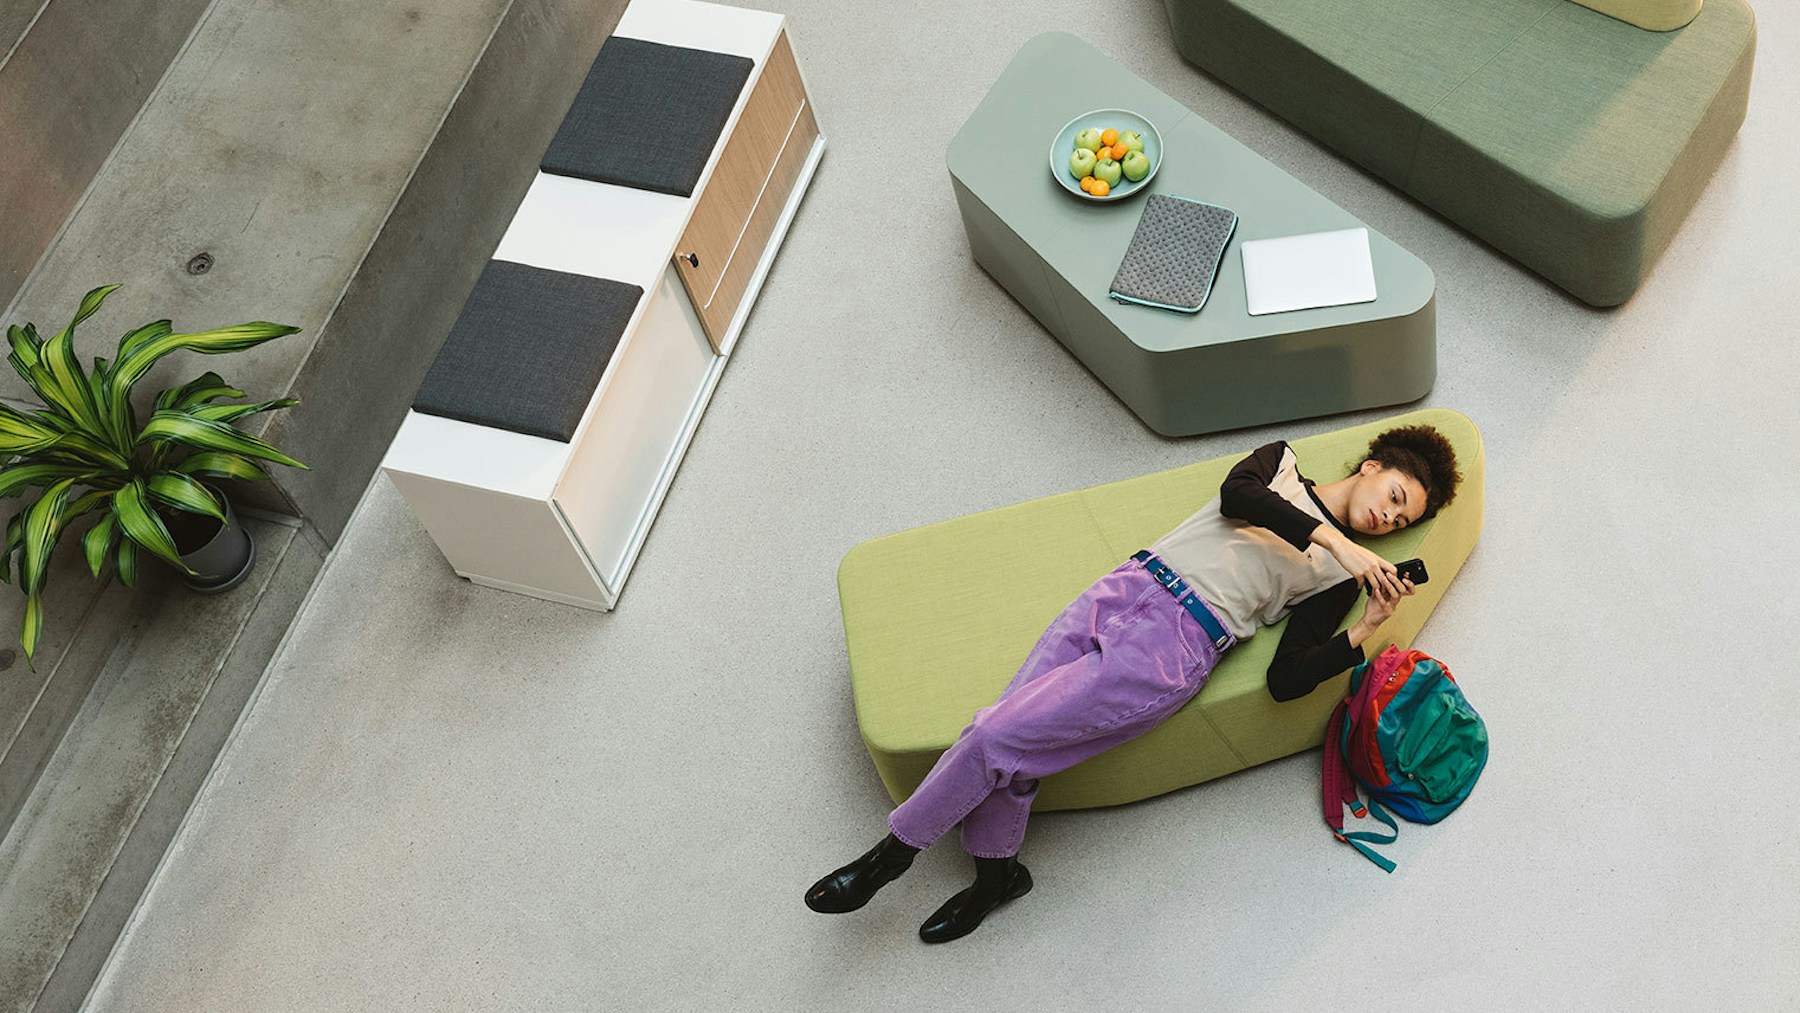 A woman with short dark hair and purple trousers is lying on an Organic Office lounge furniture, with a backpack next to her. The picture is a bird's eye view.